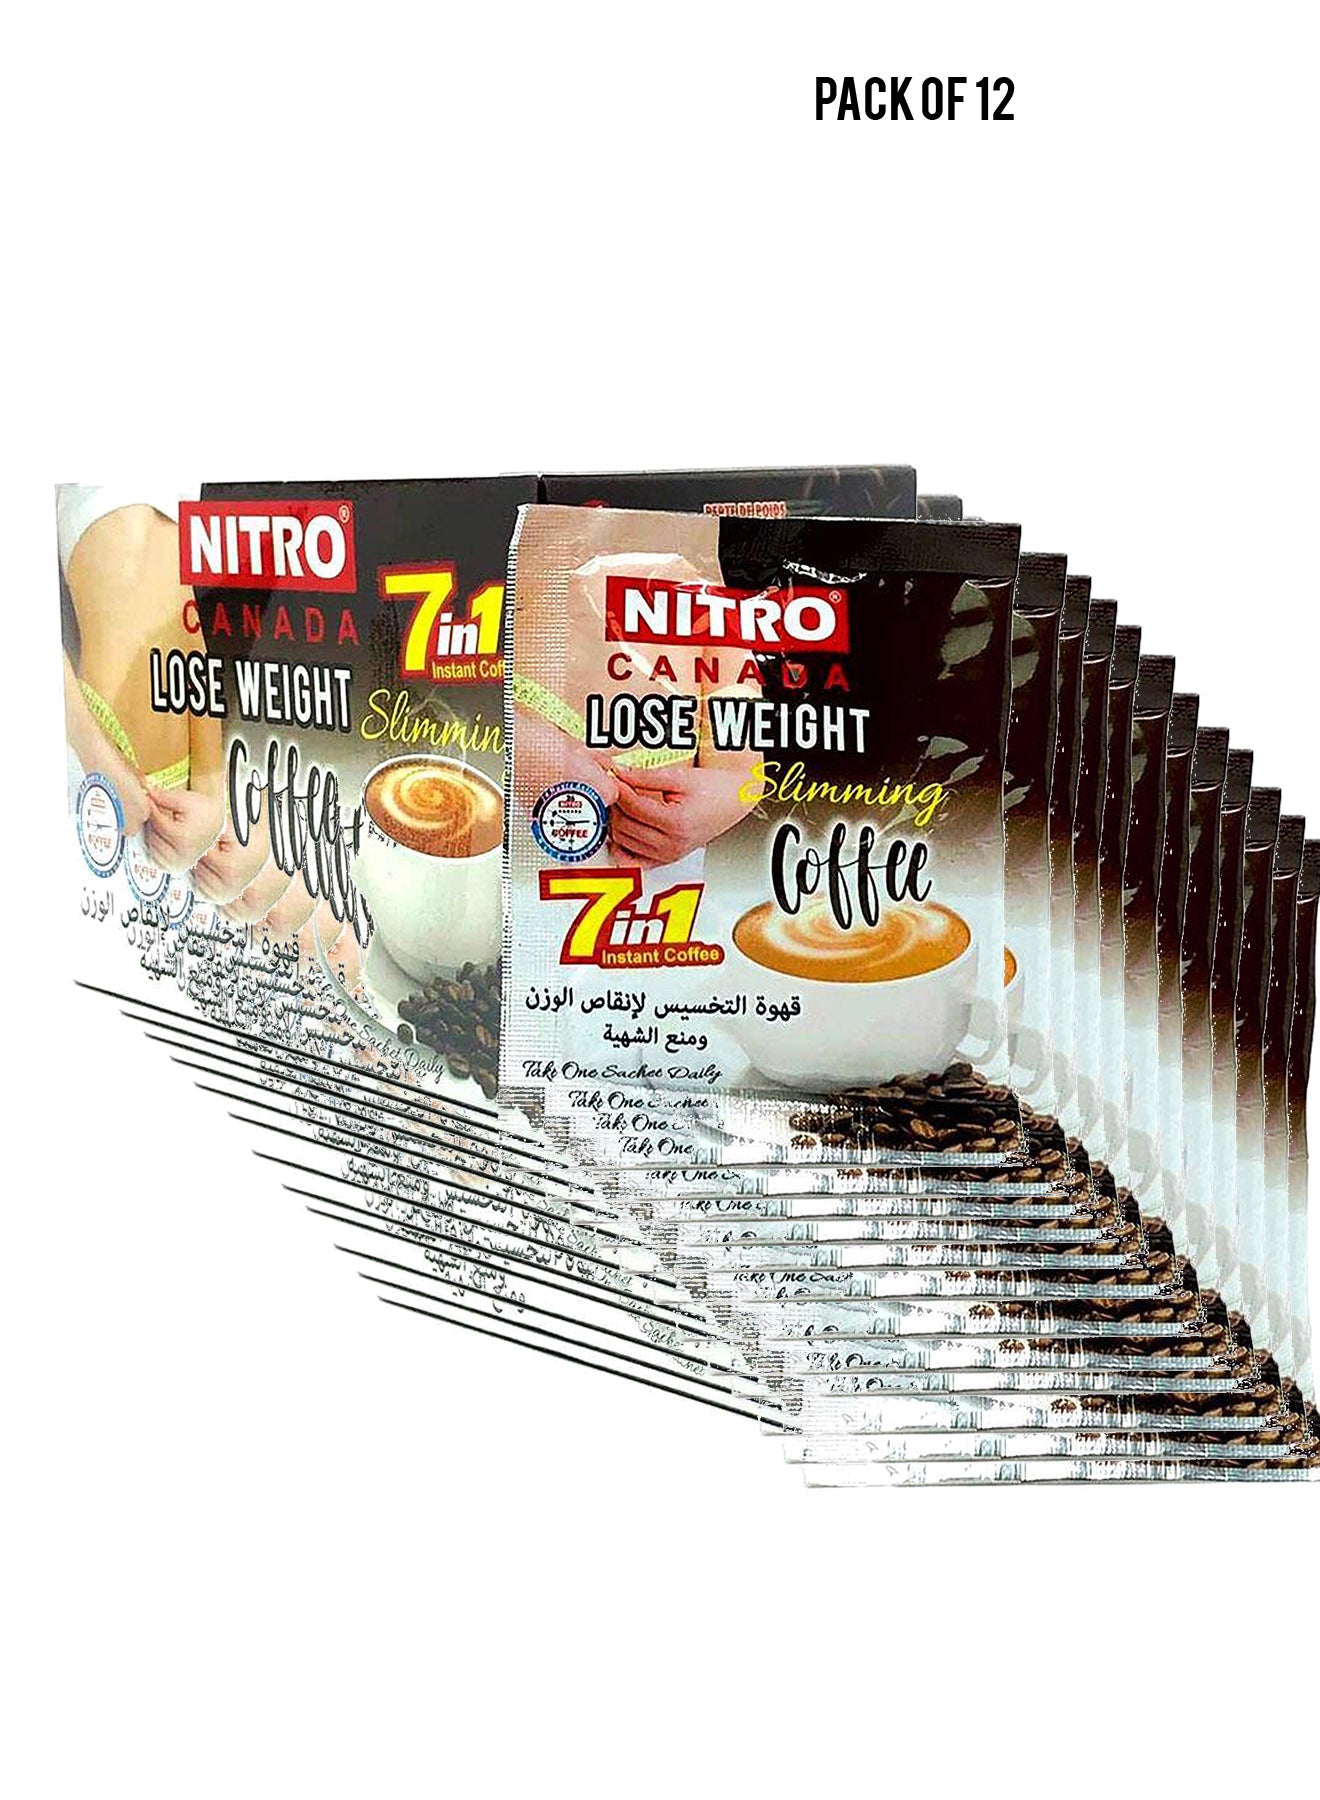 Nitro Canada Lose Weight Slimming Coffee  7in1 12 sachets Value Pack of 12 